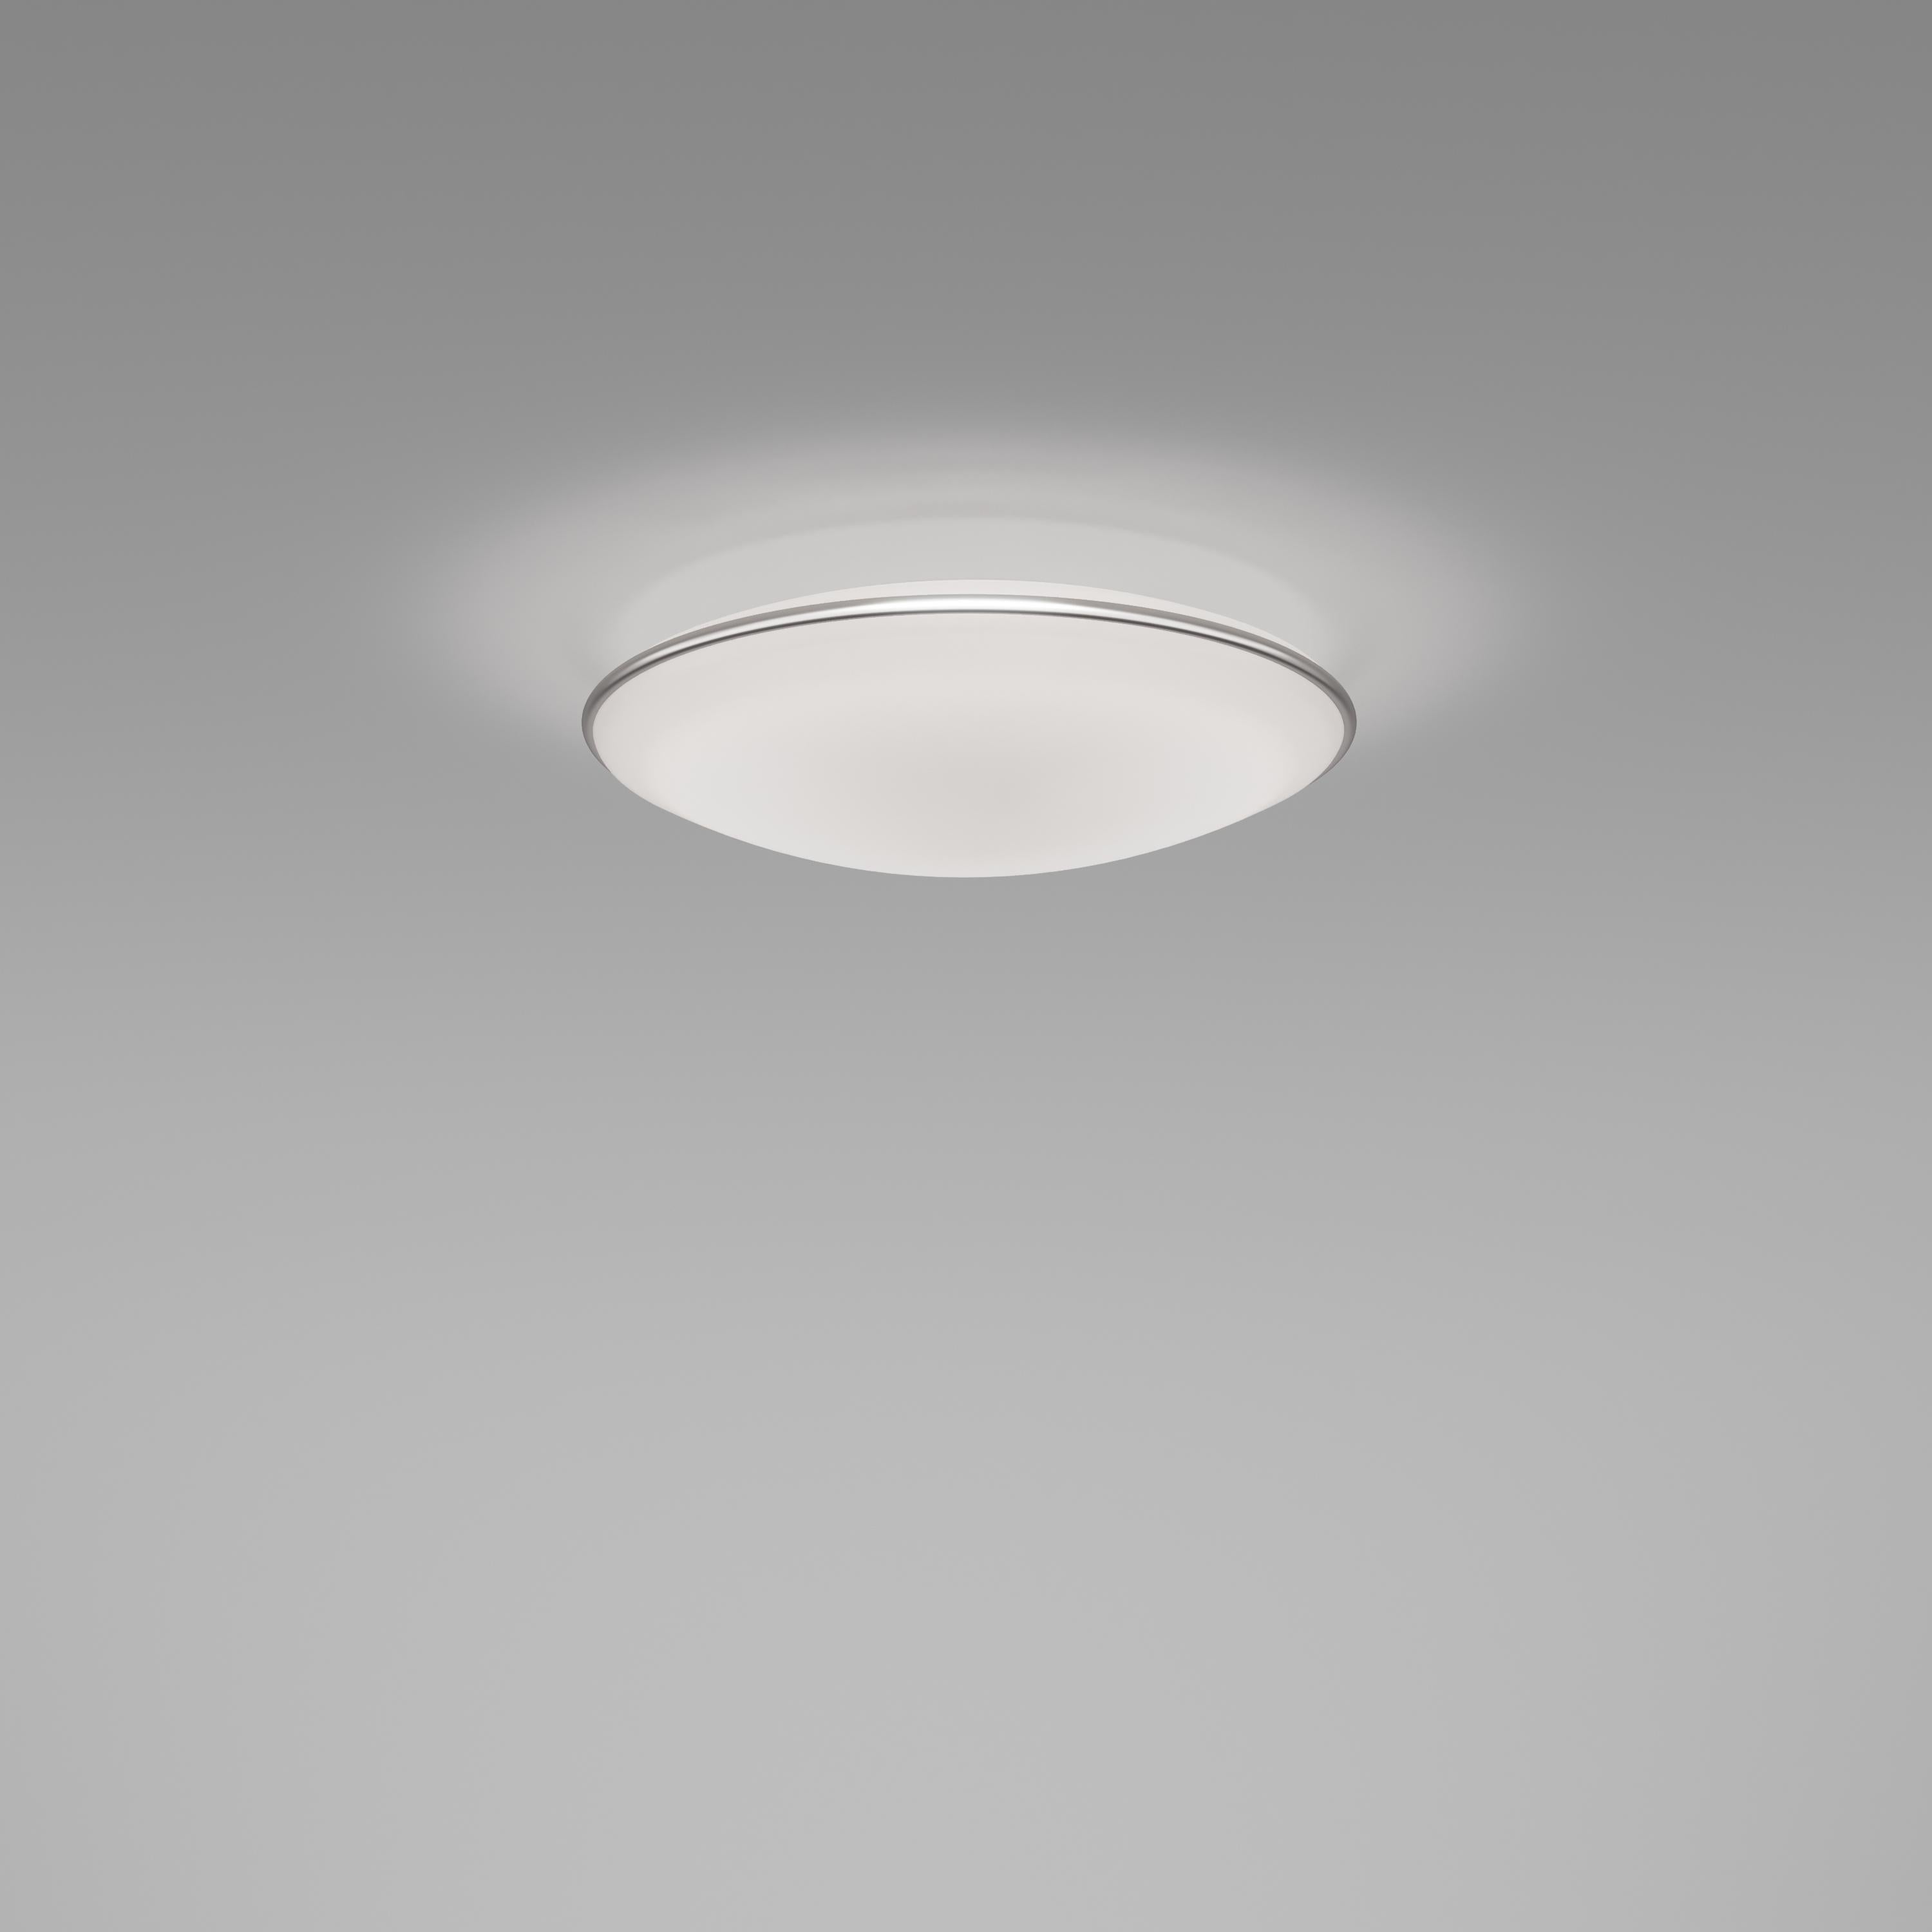 A model with a lenticular shape, available in the ceiling or wall lamp versions. In three different sizes, it is made of satin-white glass, with the characteristic morrisa decoration.

Specifications:
Material: Glass, chrome
Light source: E26